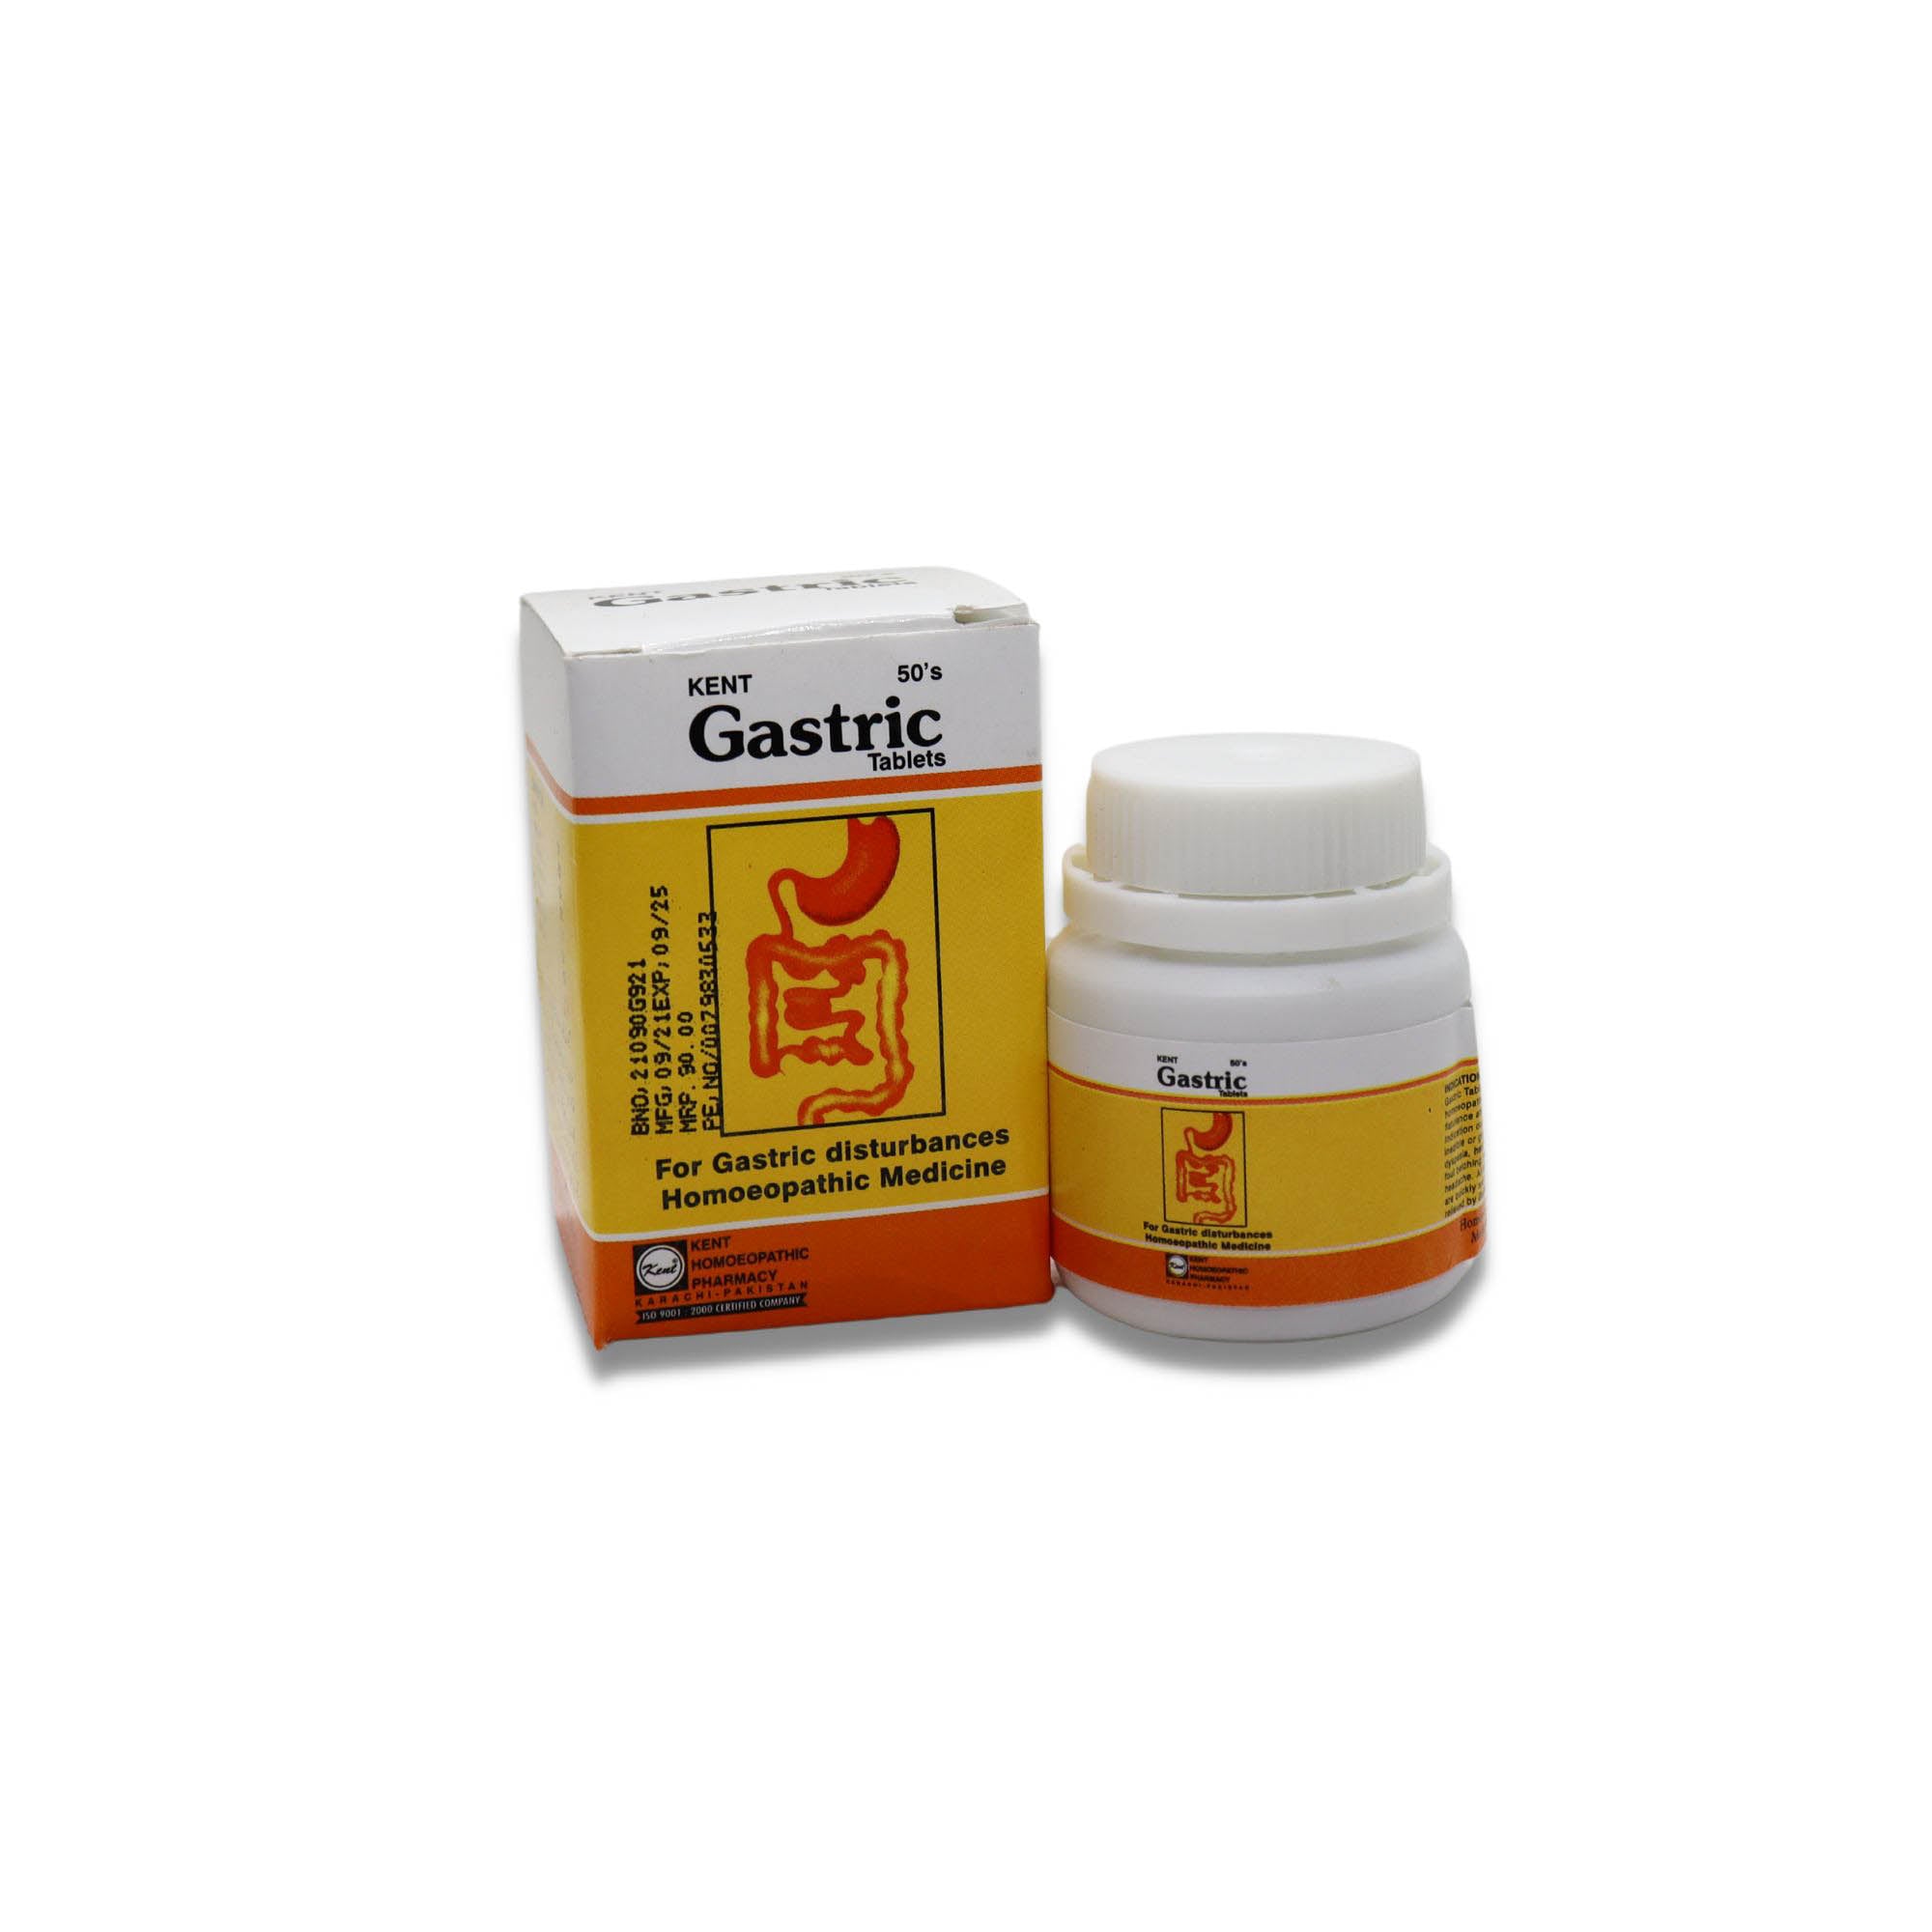 Gastric Syrup And Tablets